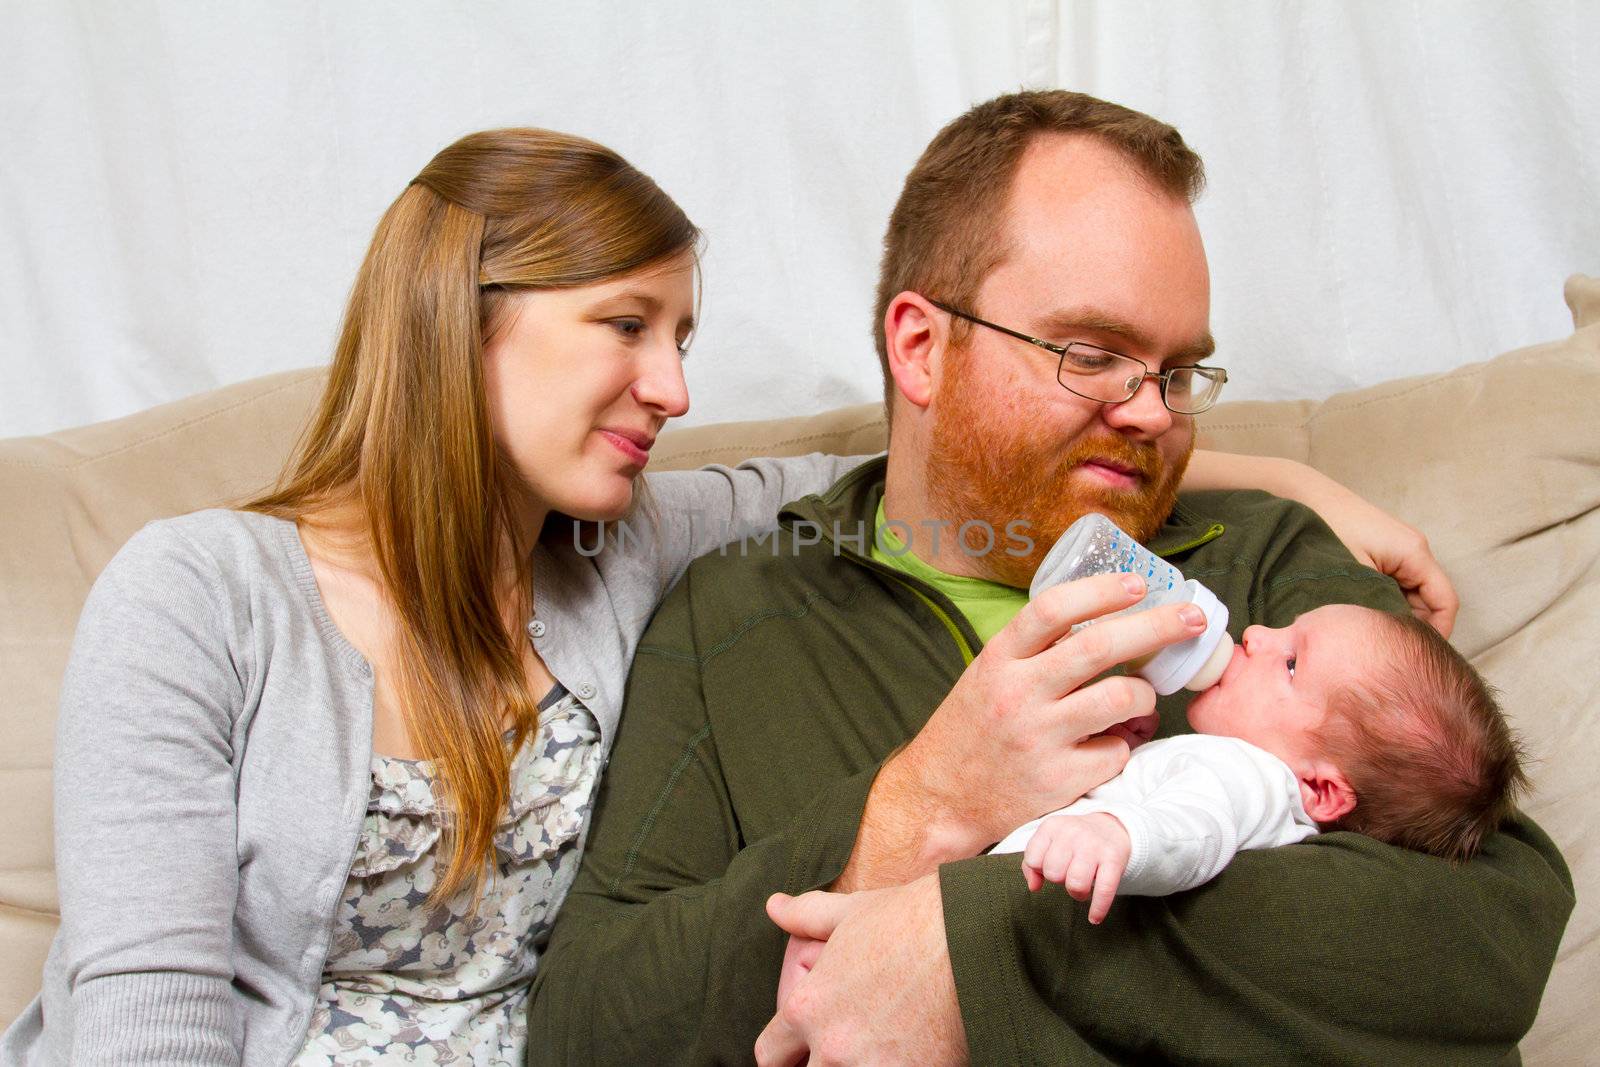 A mother and father hold their newborn baby son in their arms and look towards him showing happiness and caring emotions while bottle feeding the boy.